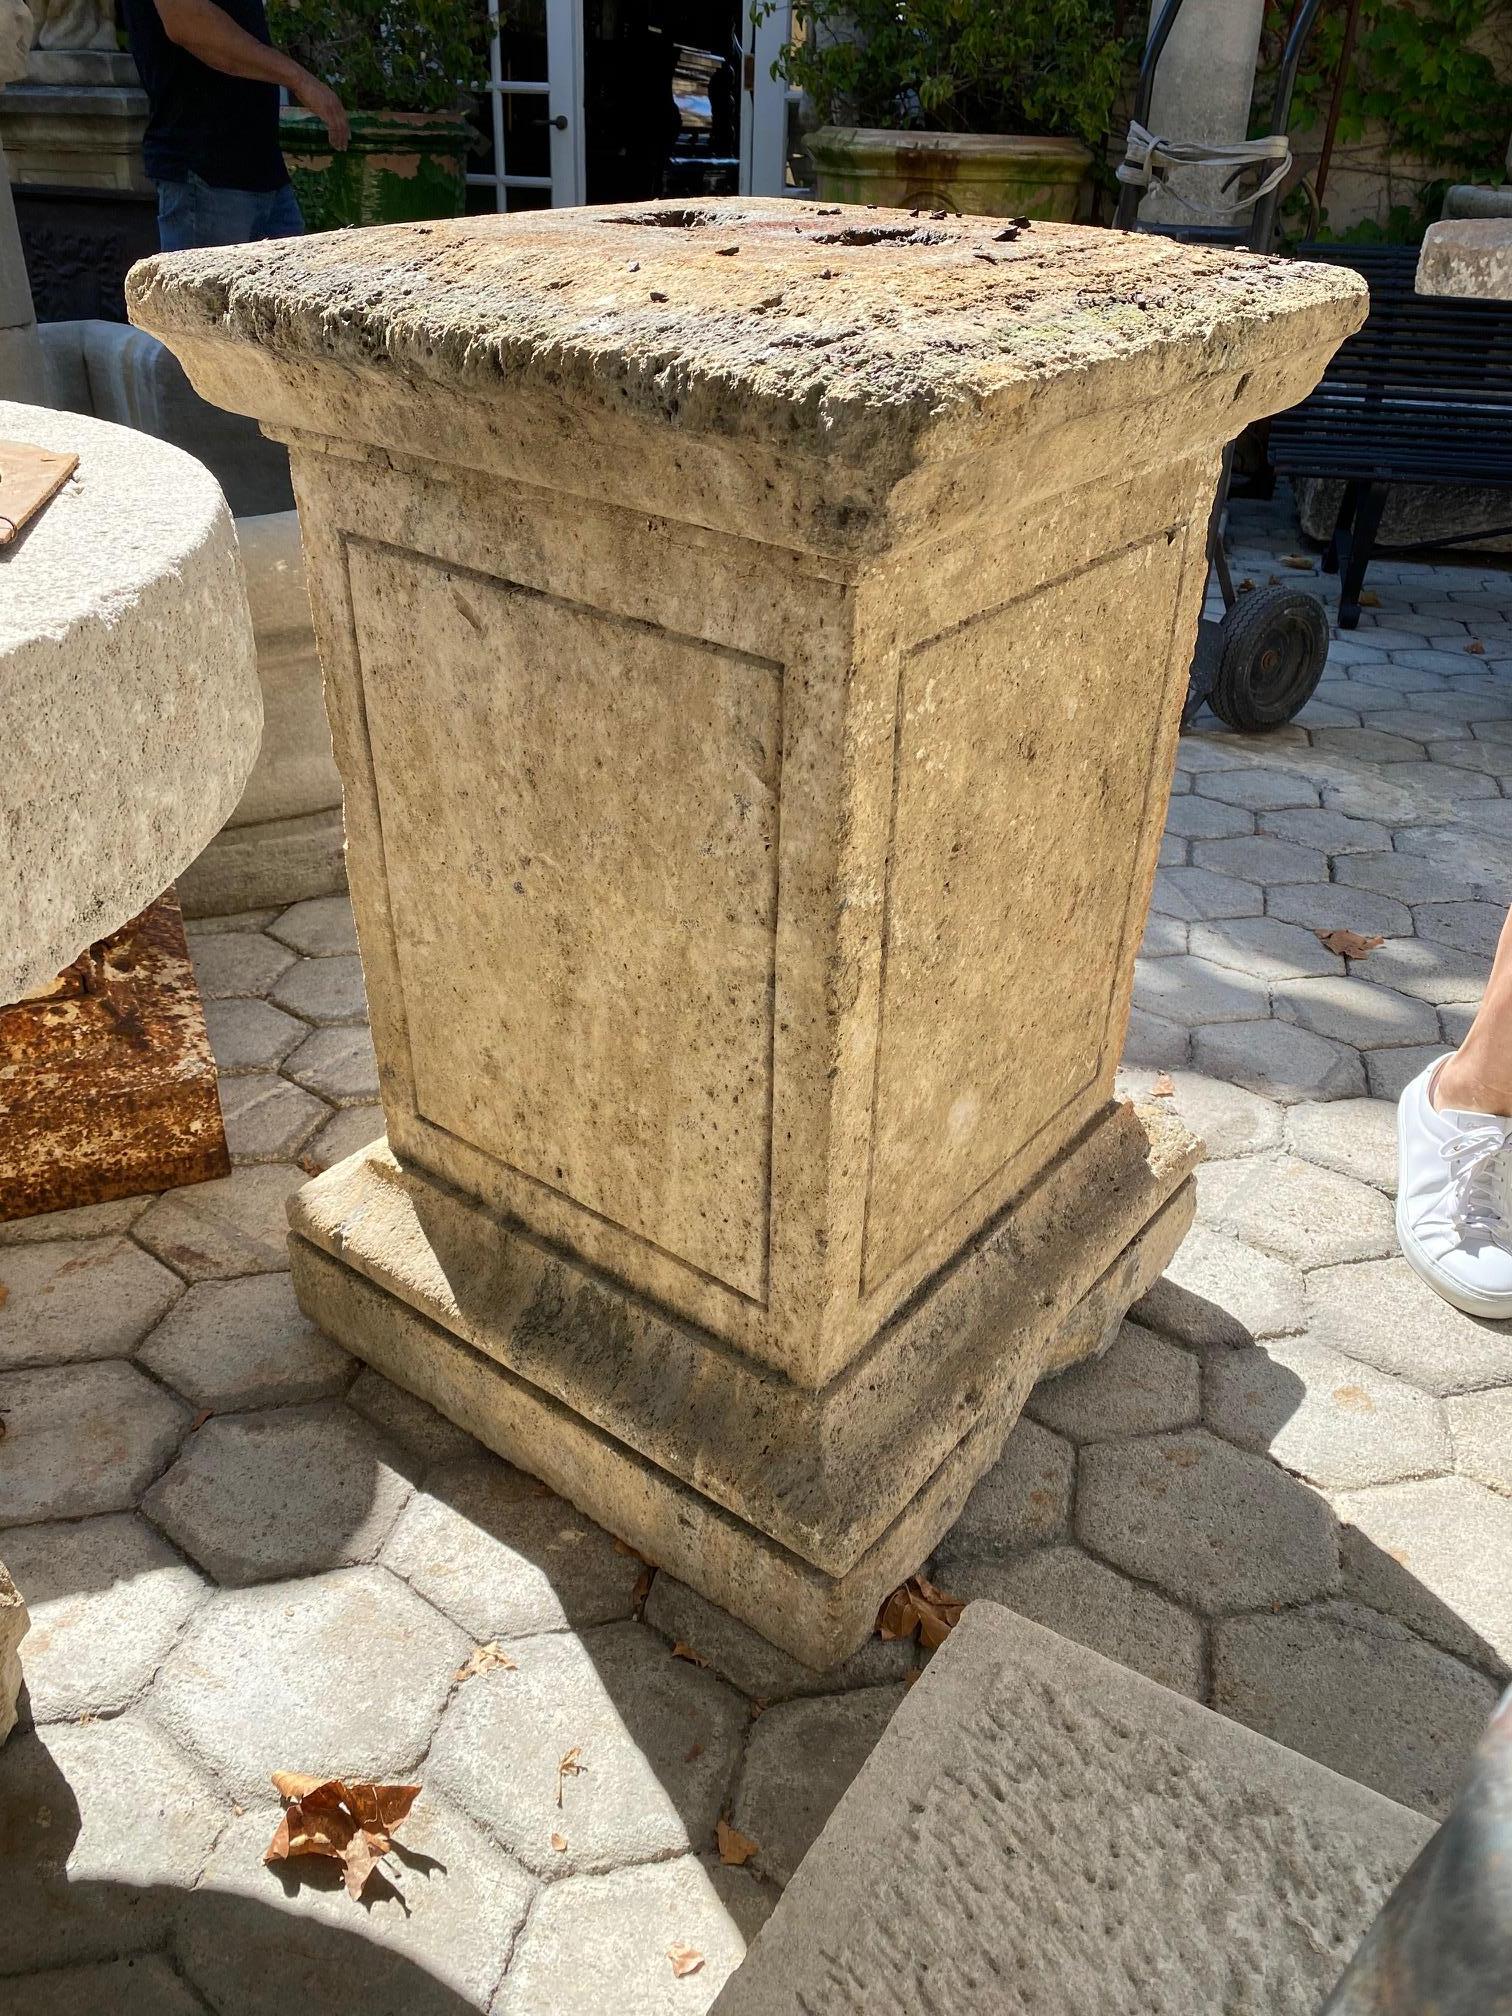 Hand Carved Stone Pedestal Column Post Fountain Base Center block center piece . Nicely hand carved one single block Early 19th Century stonesquare base pedestal . Could be used as a Focal point in a garden as an architectural decorative element ,